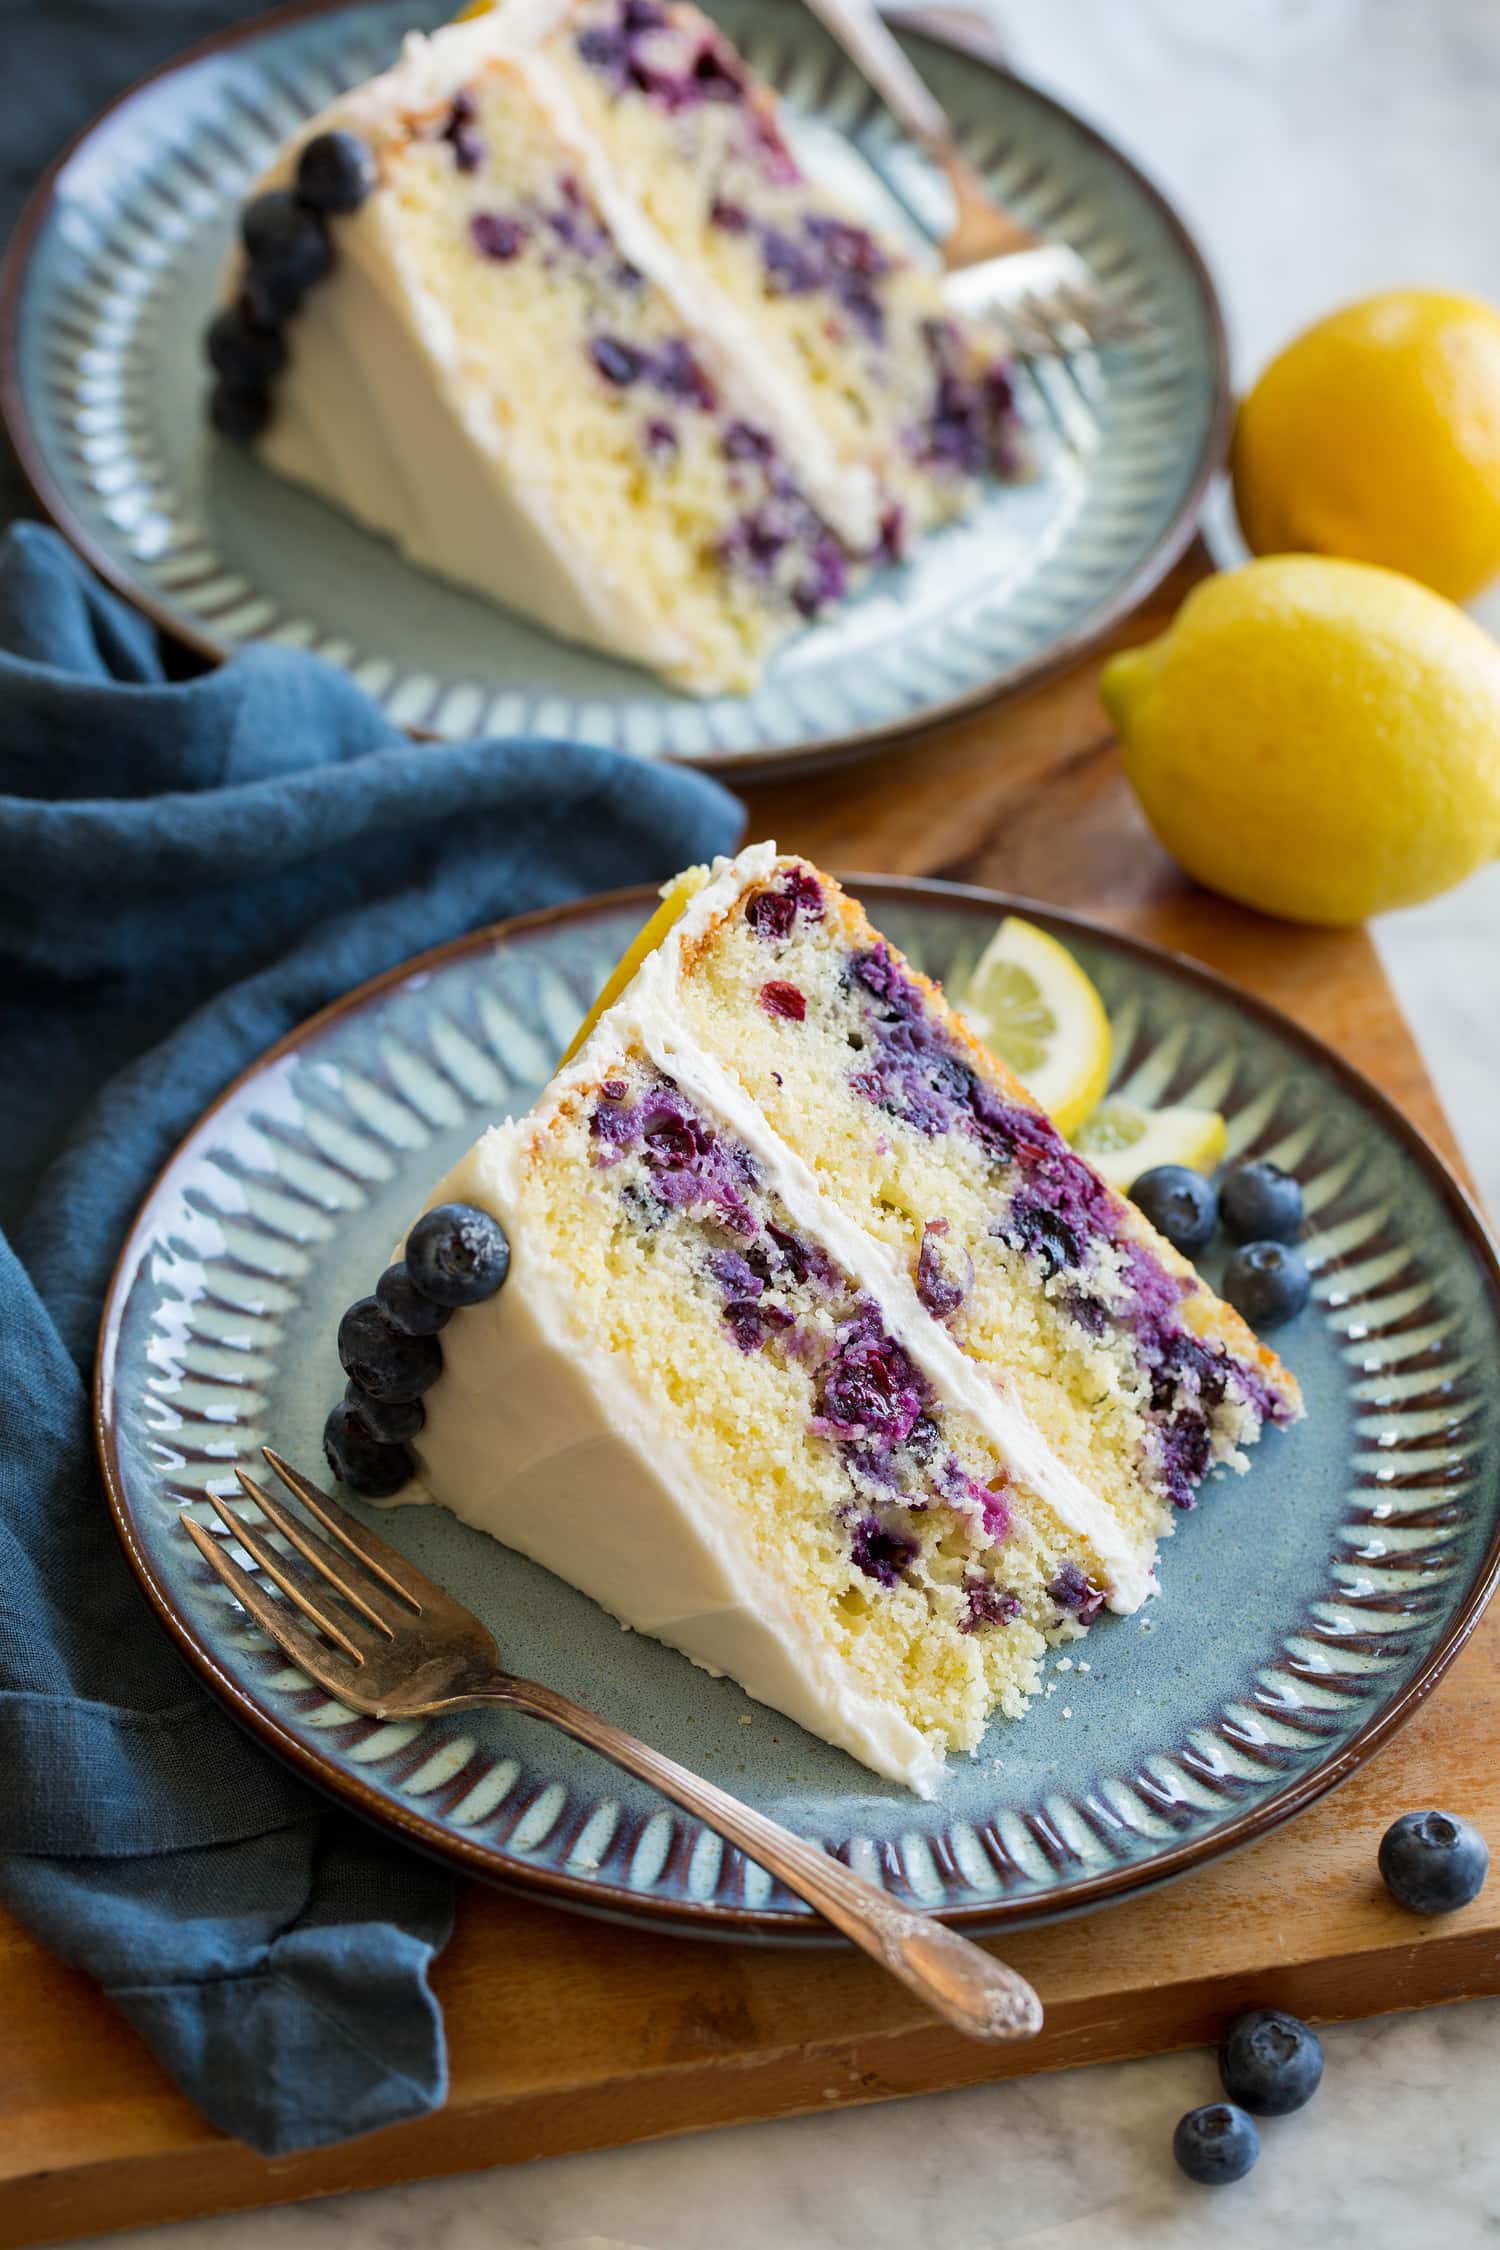 Two slices of homemade blueberry and lemon cake.